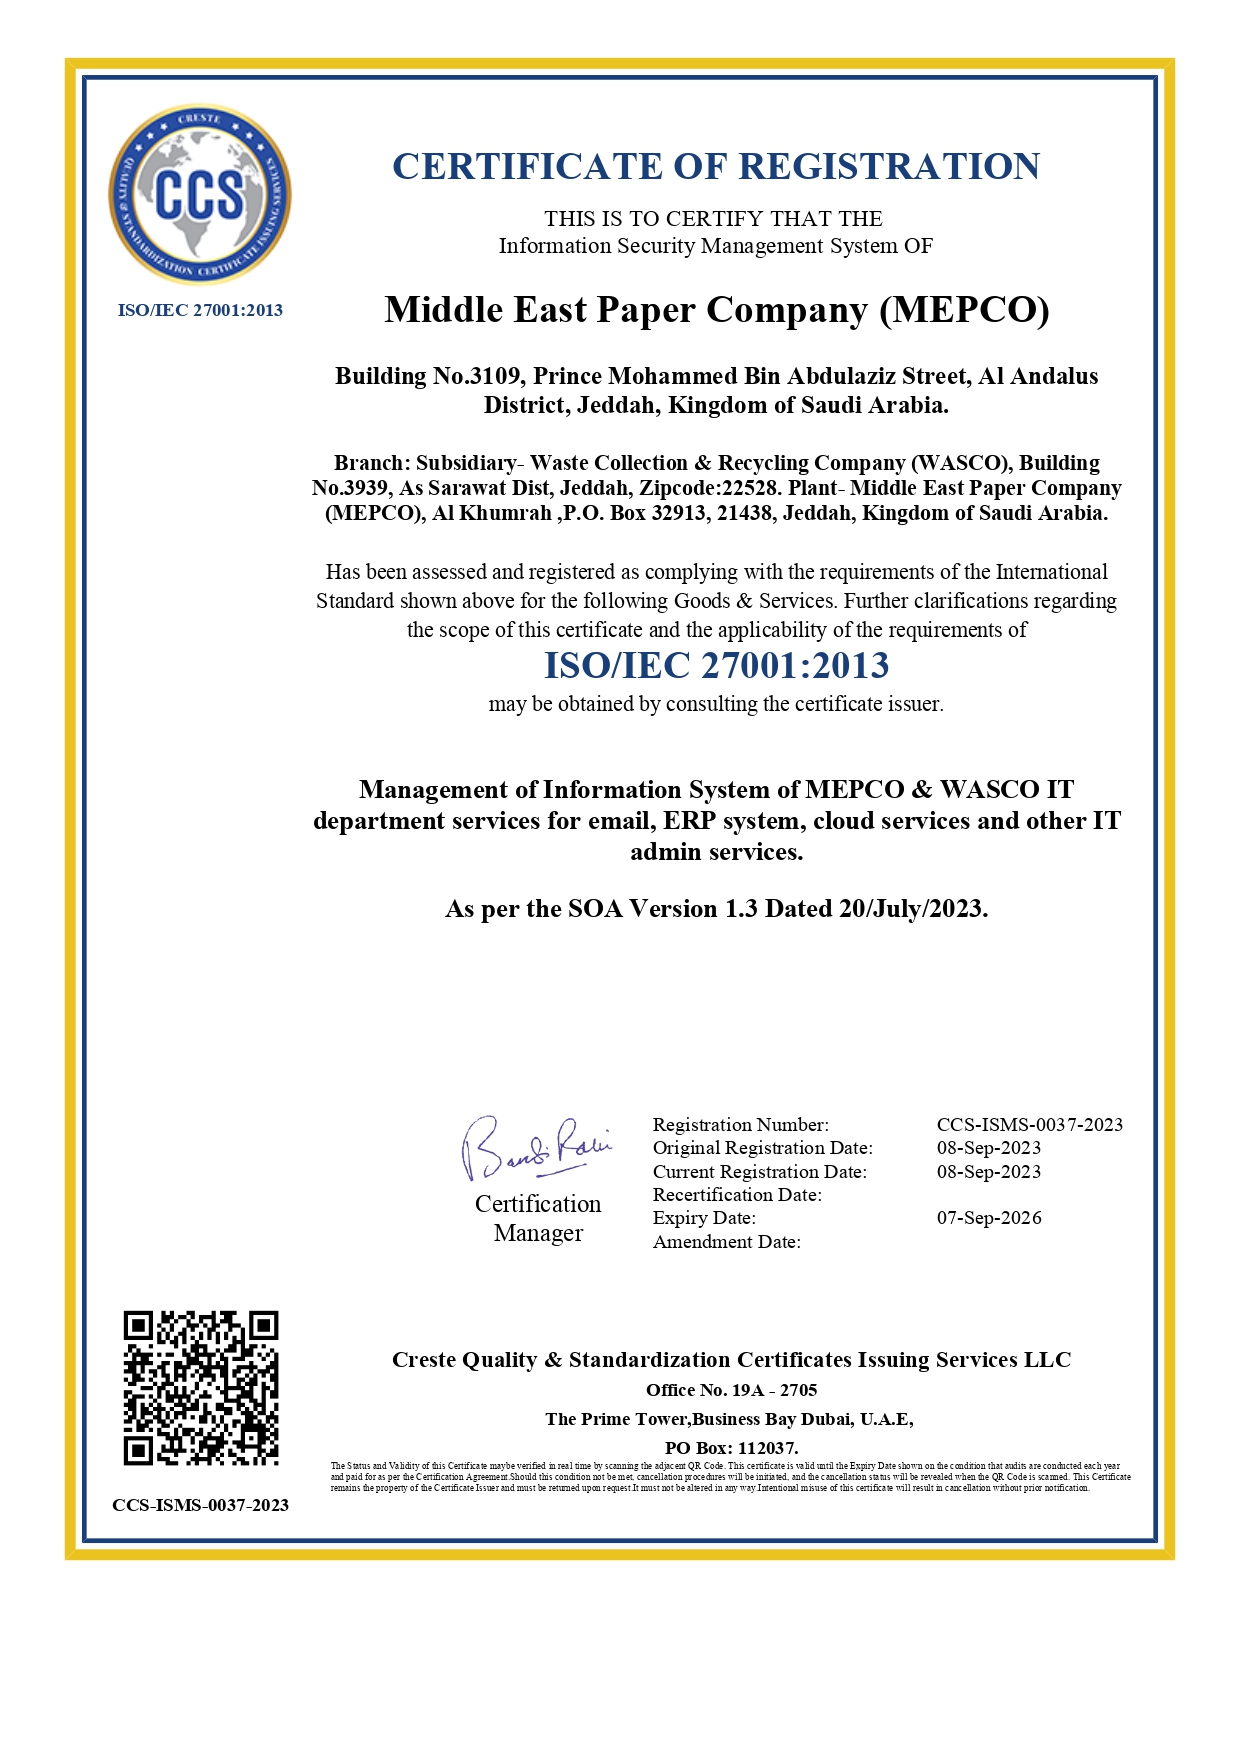 Middle East Paper Company (MEPCO)-29-09-2023-15-47-57_page-0001